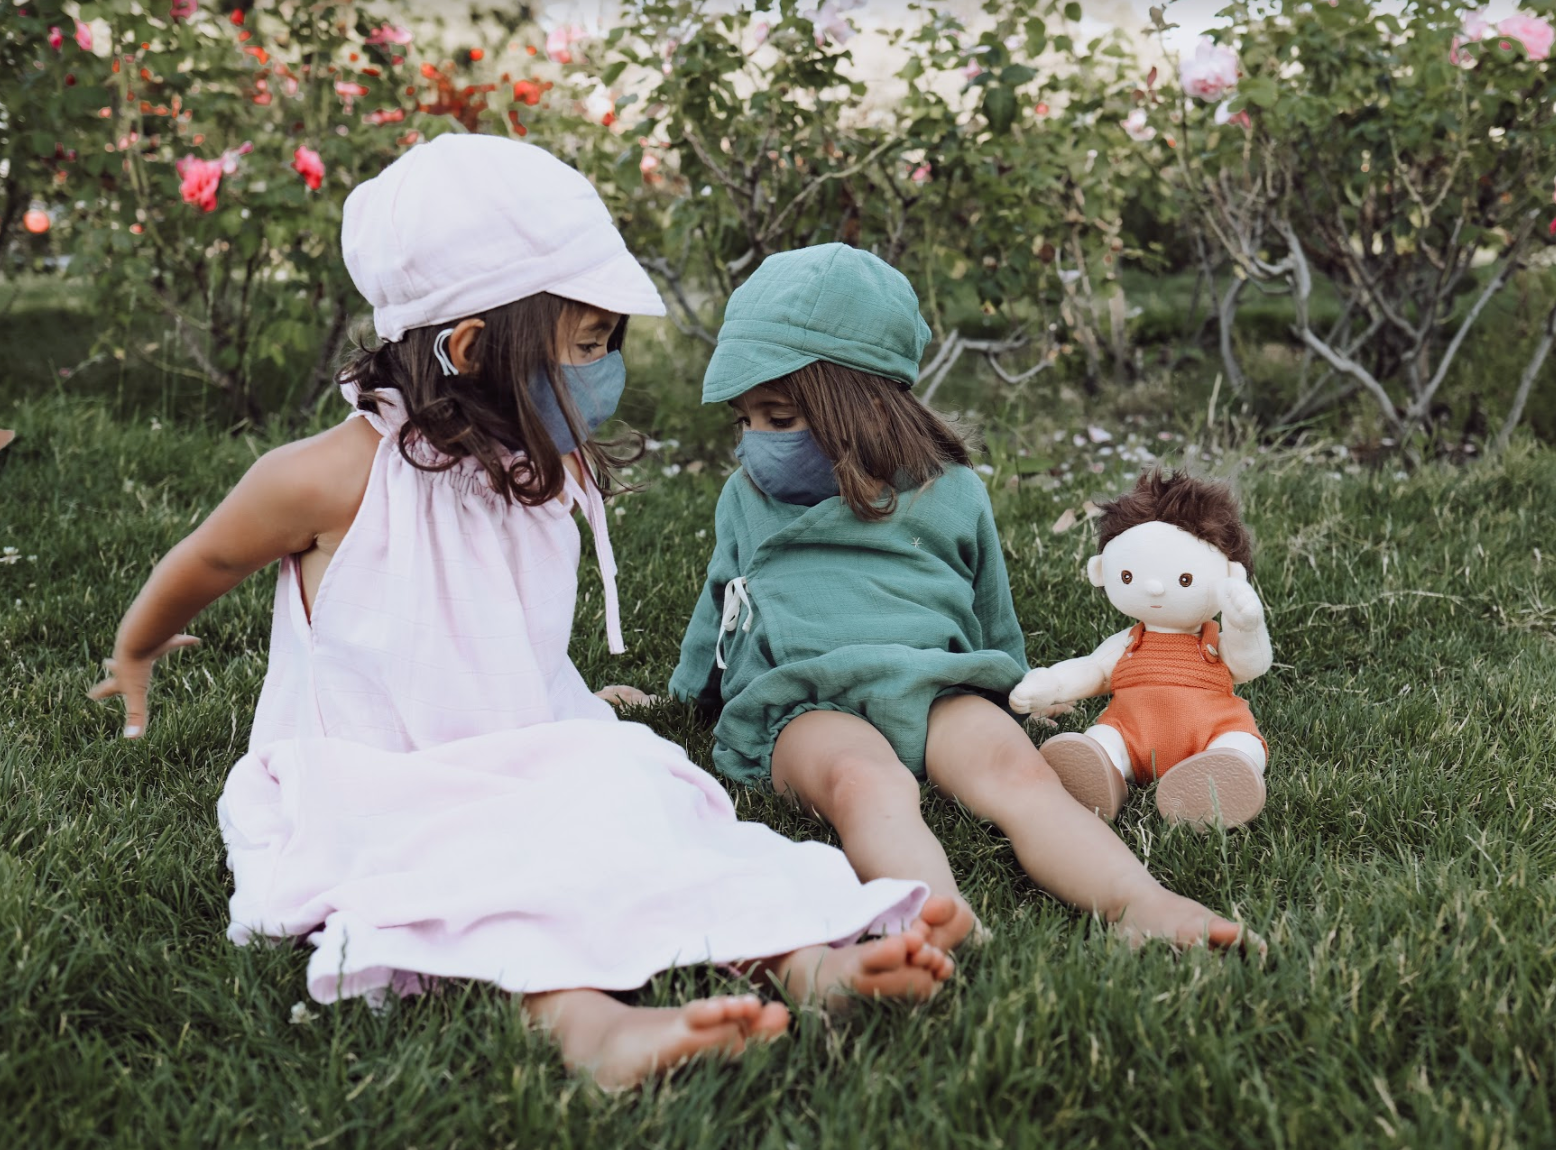 COVID-19 Parenting Guide: Tips for Getting Your Toddlers to Wear Masks